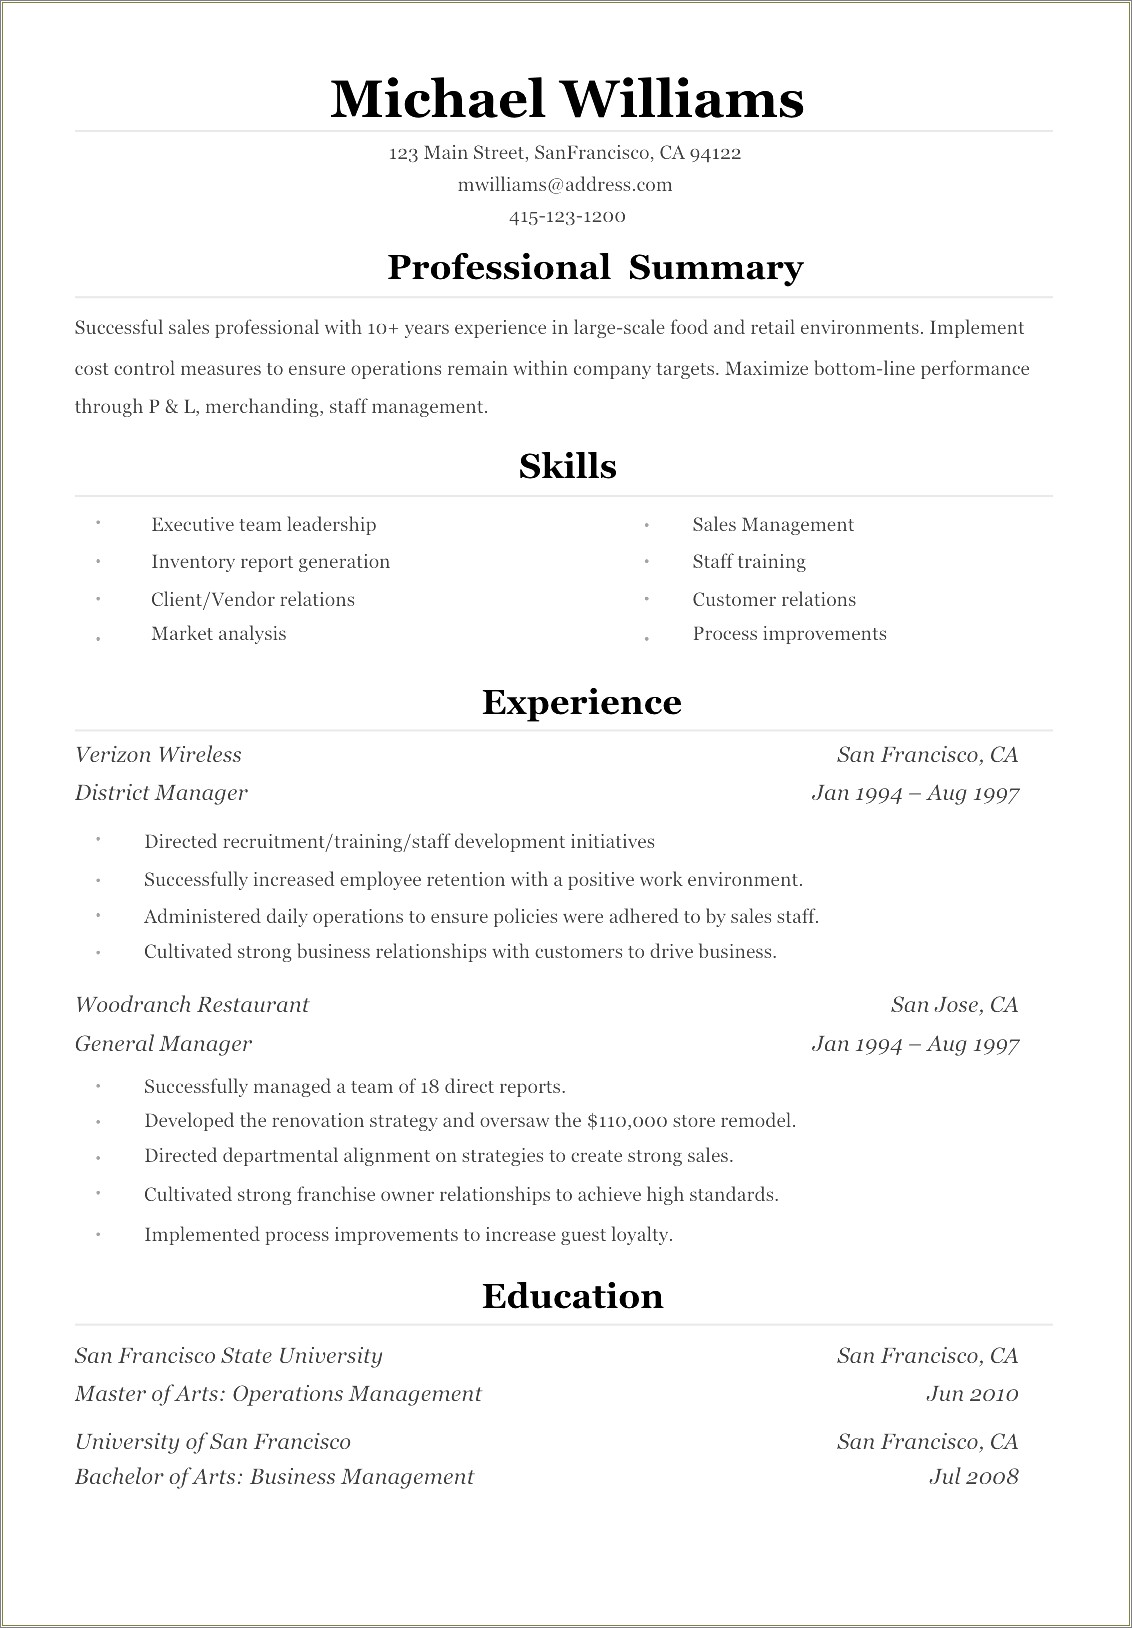 Resume With Education On Bottom Example